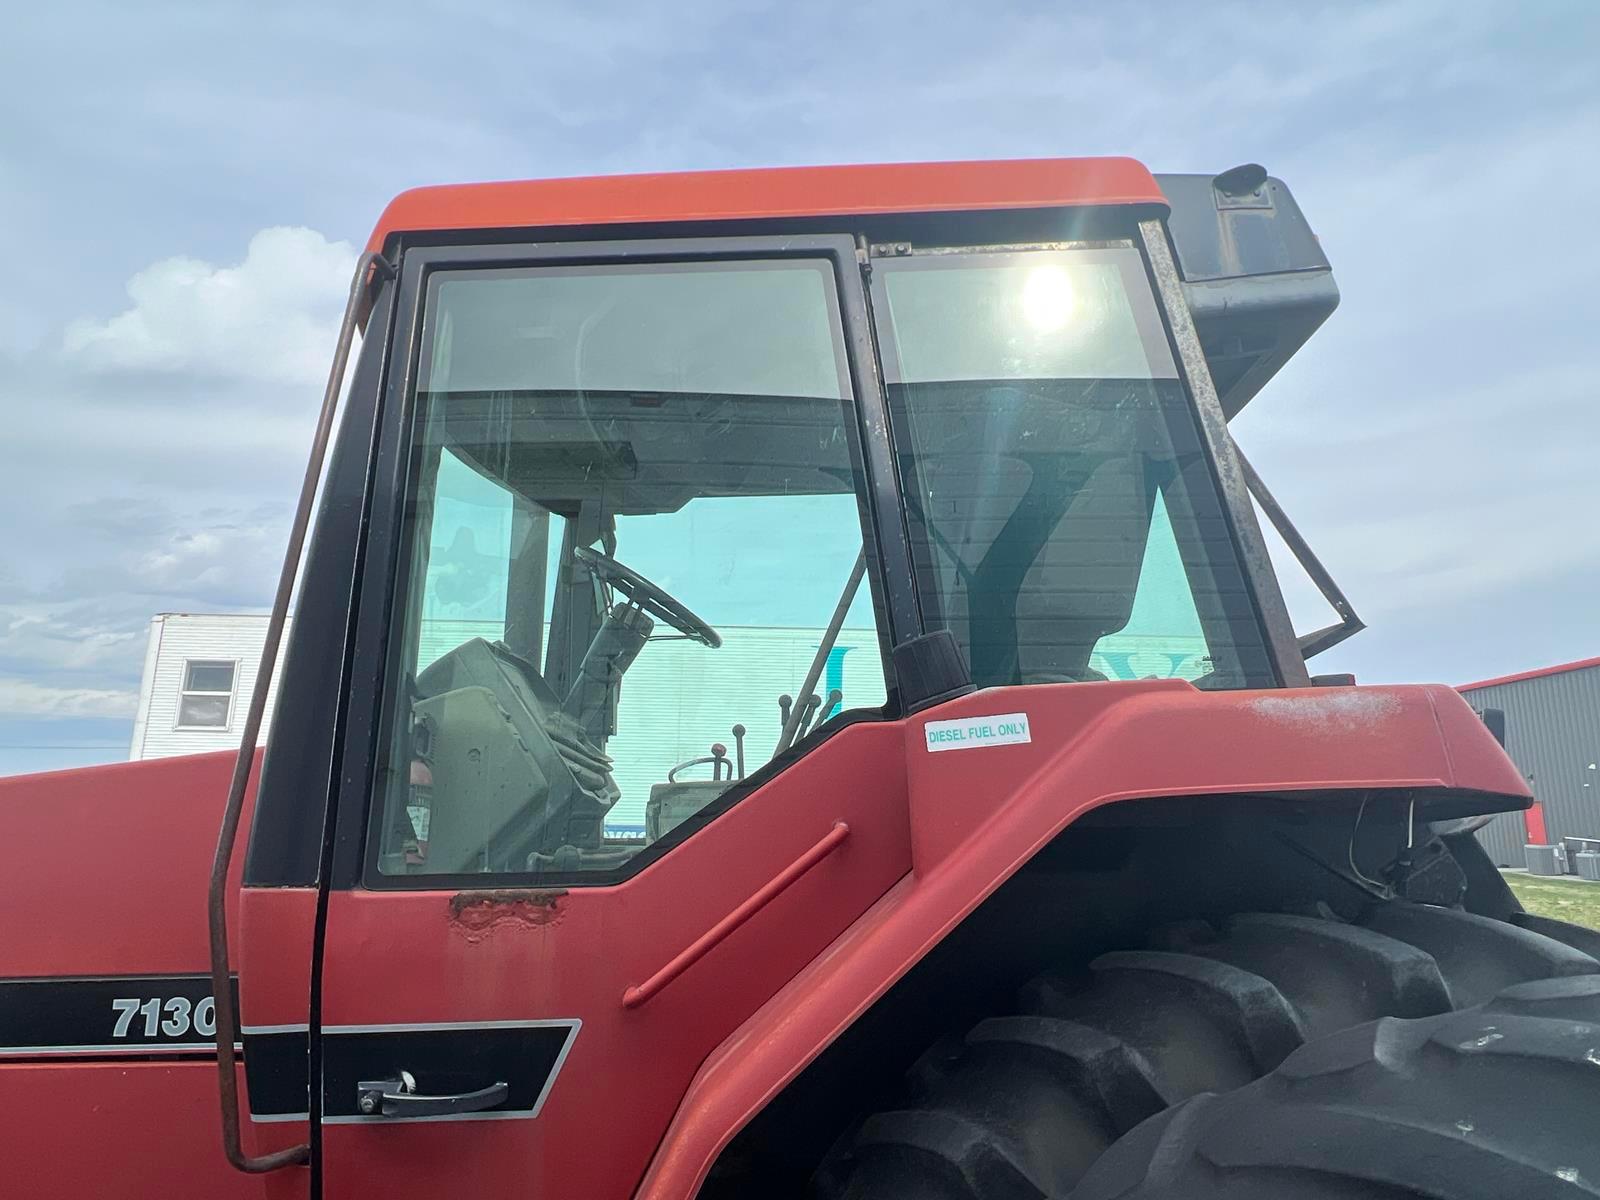 1989 Case Ih 7130 Mfwd Tractor